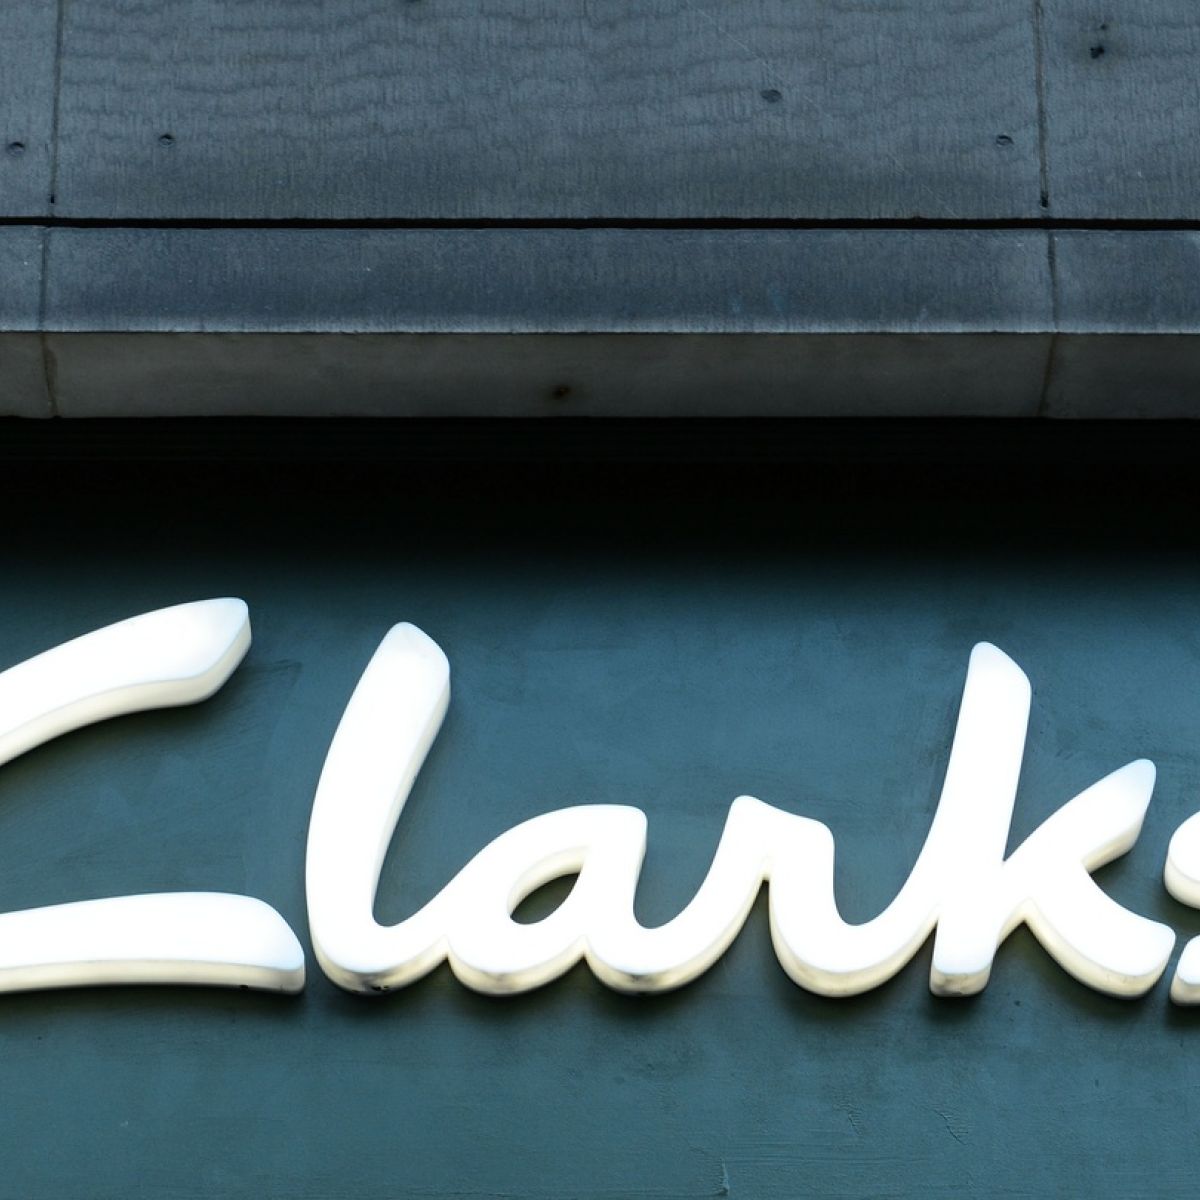 clarks shoes henry street